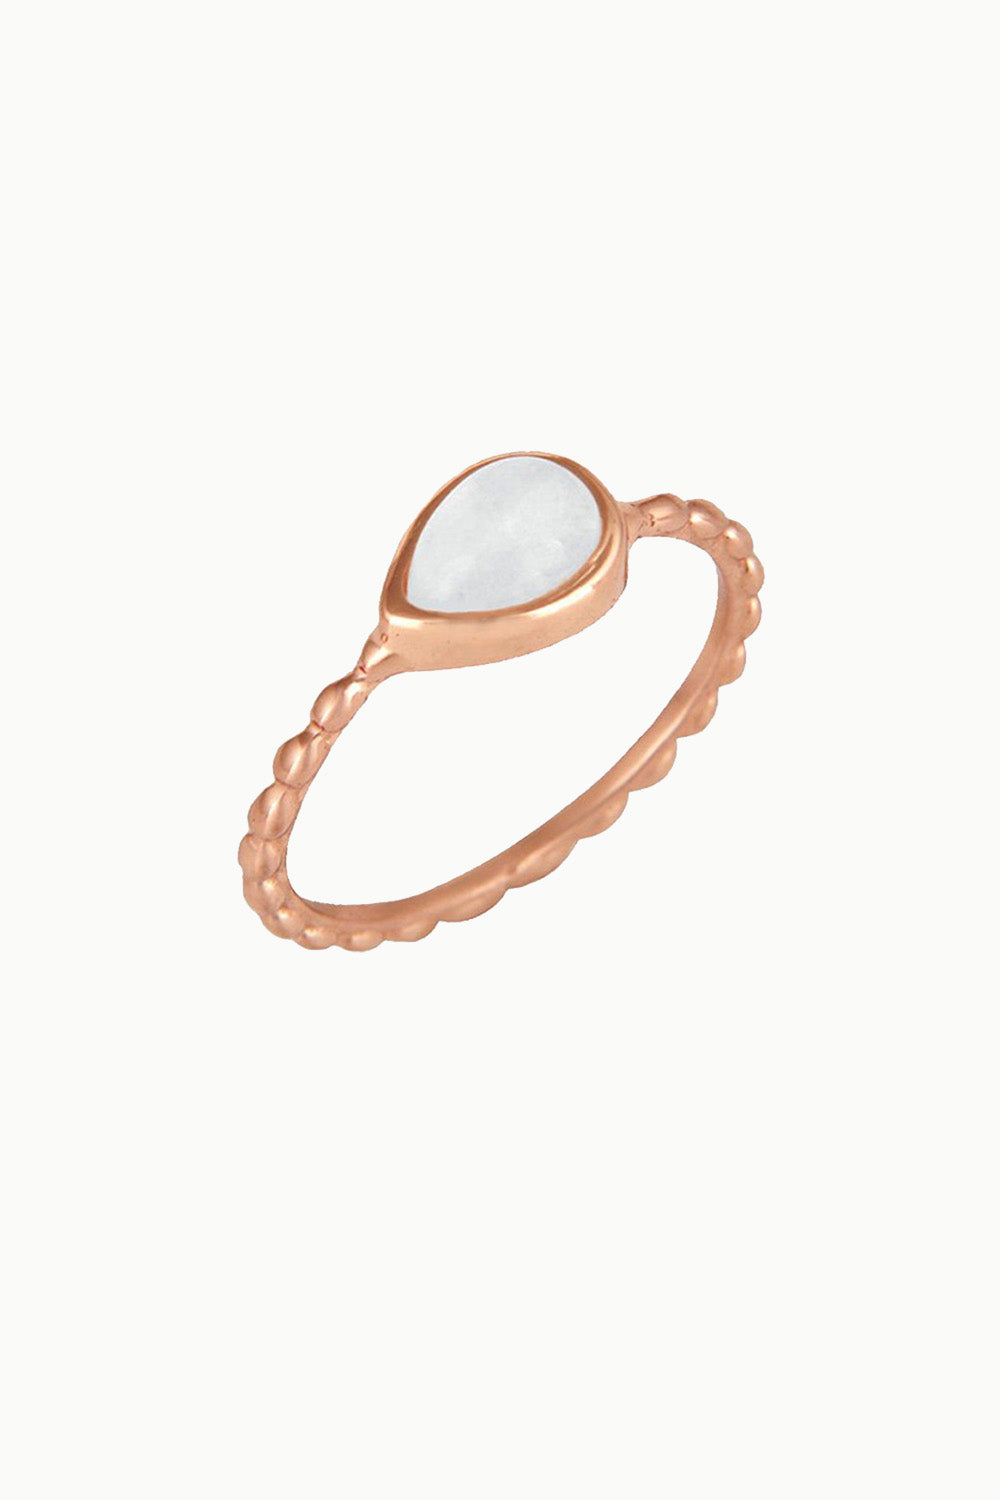 Moonstone Pinky Ring in Rose Gold Vermeil